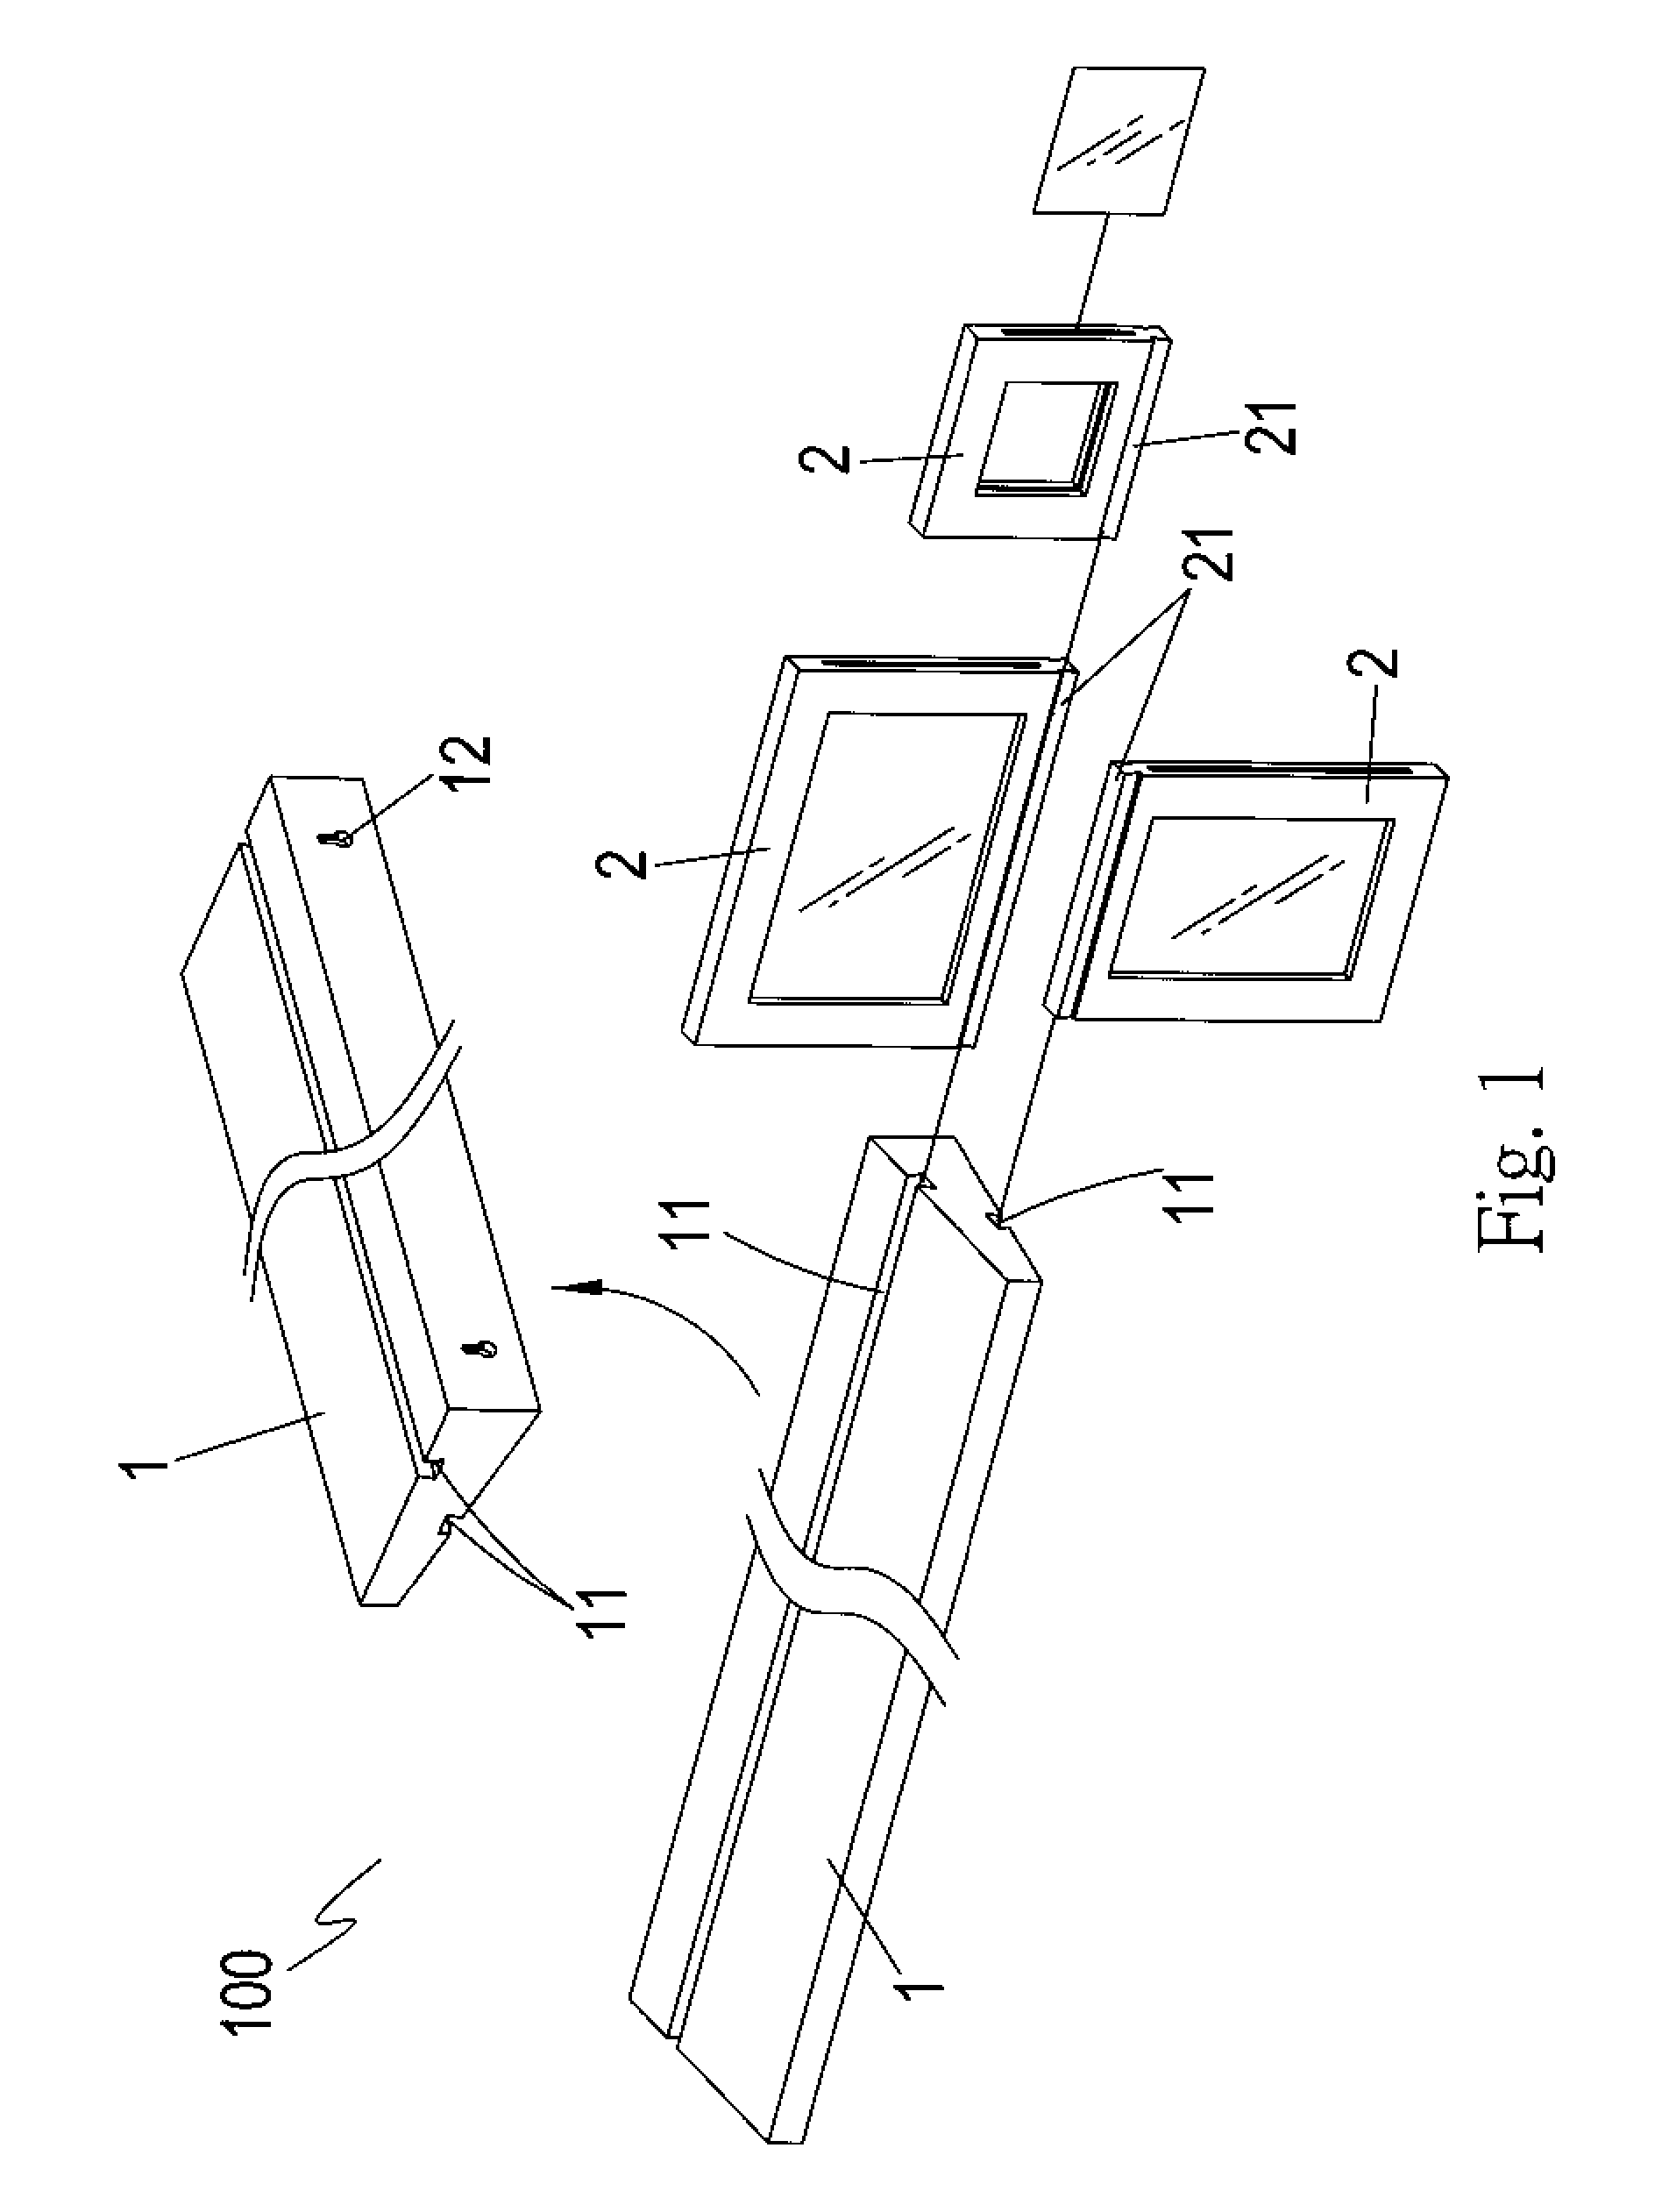 Supporting plate with at least one sliding track and capable of being installed to a wall